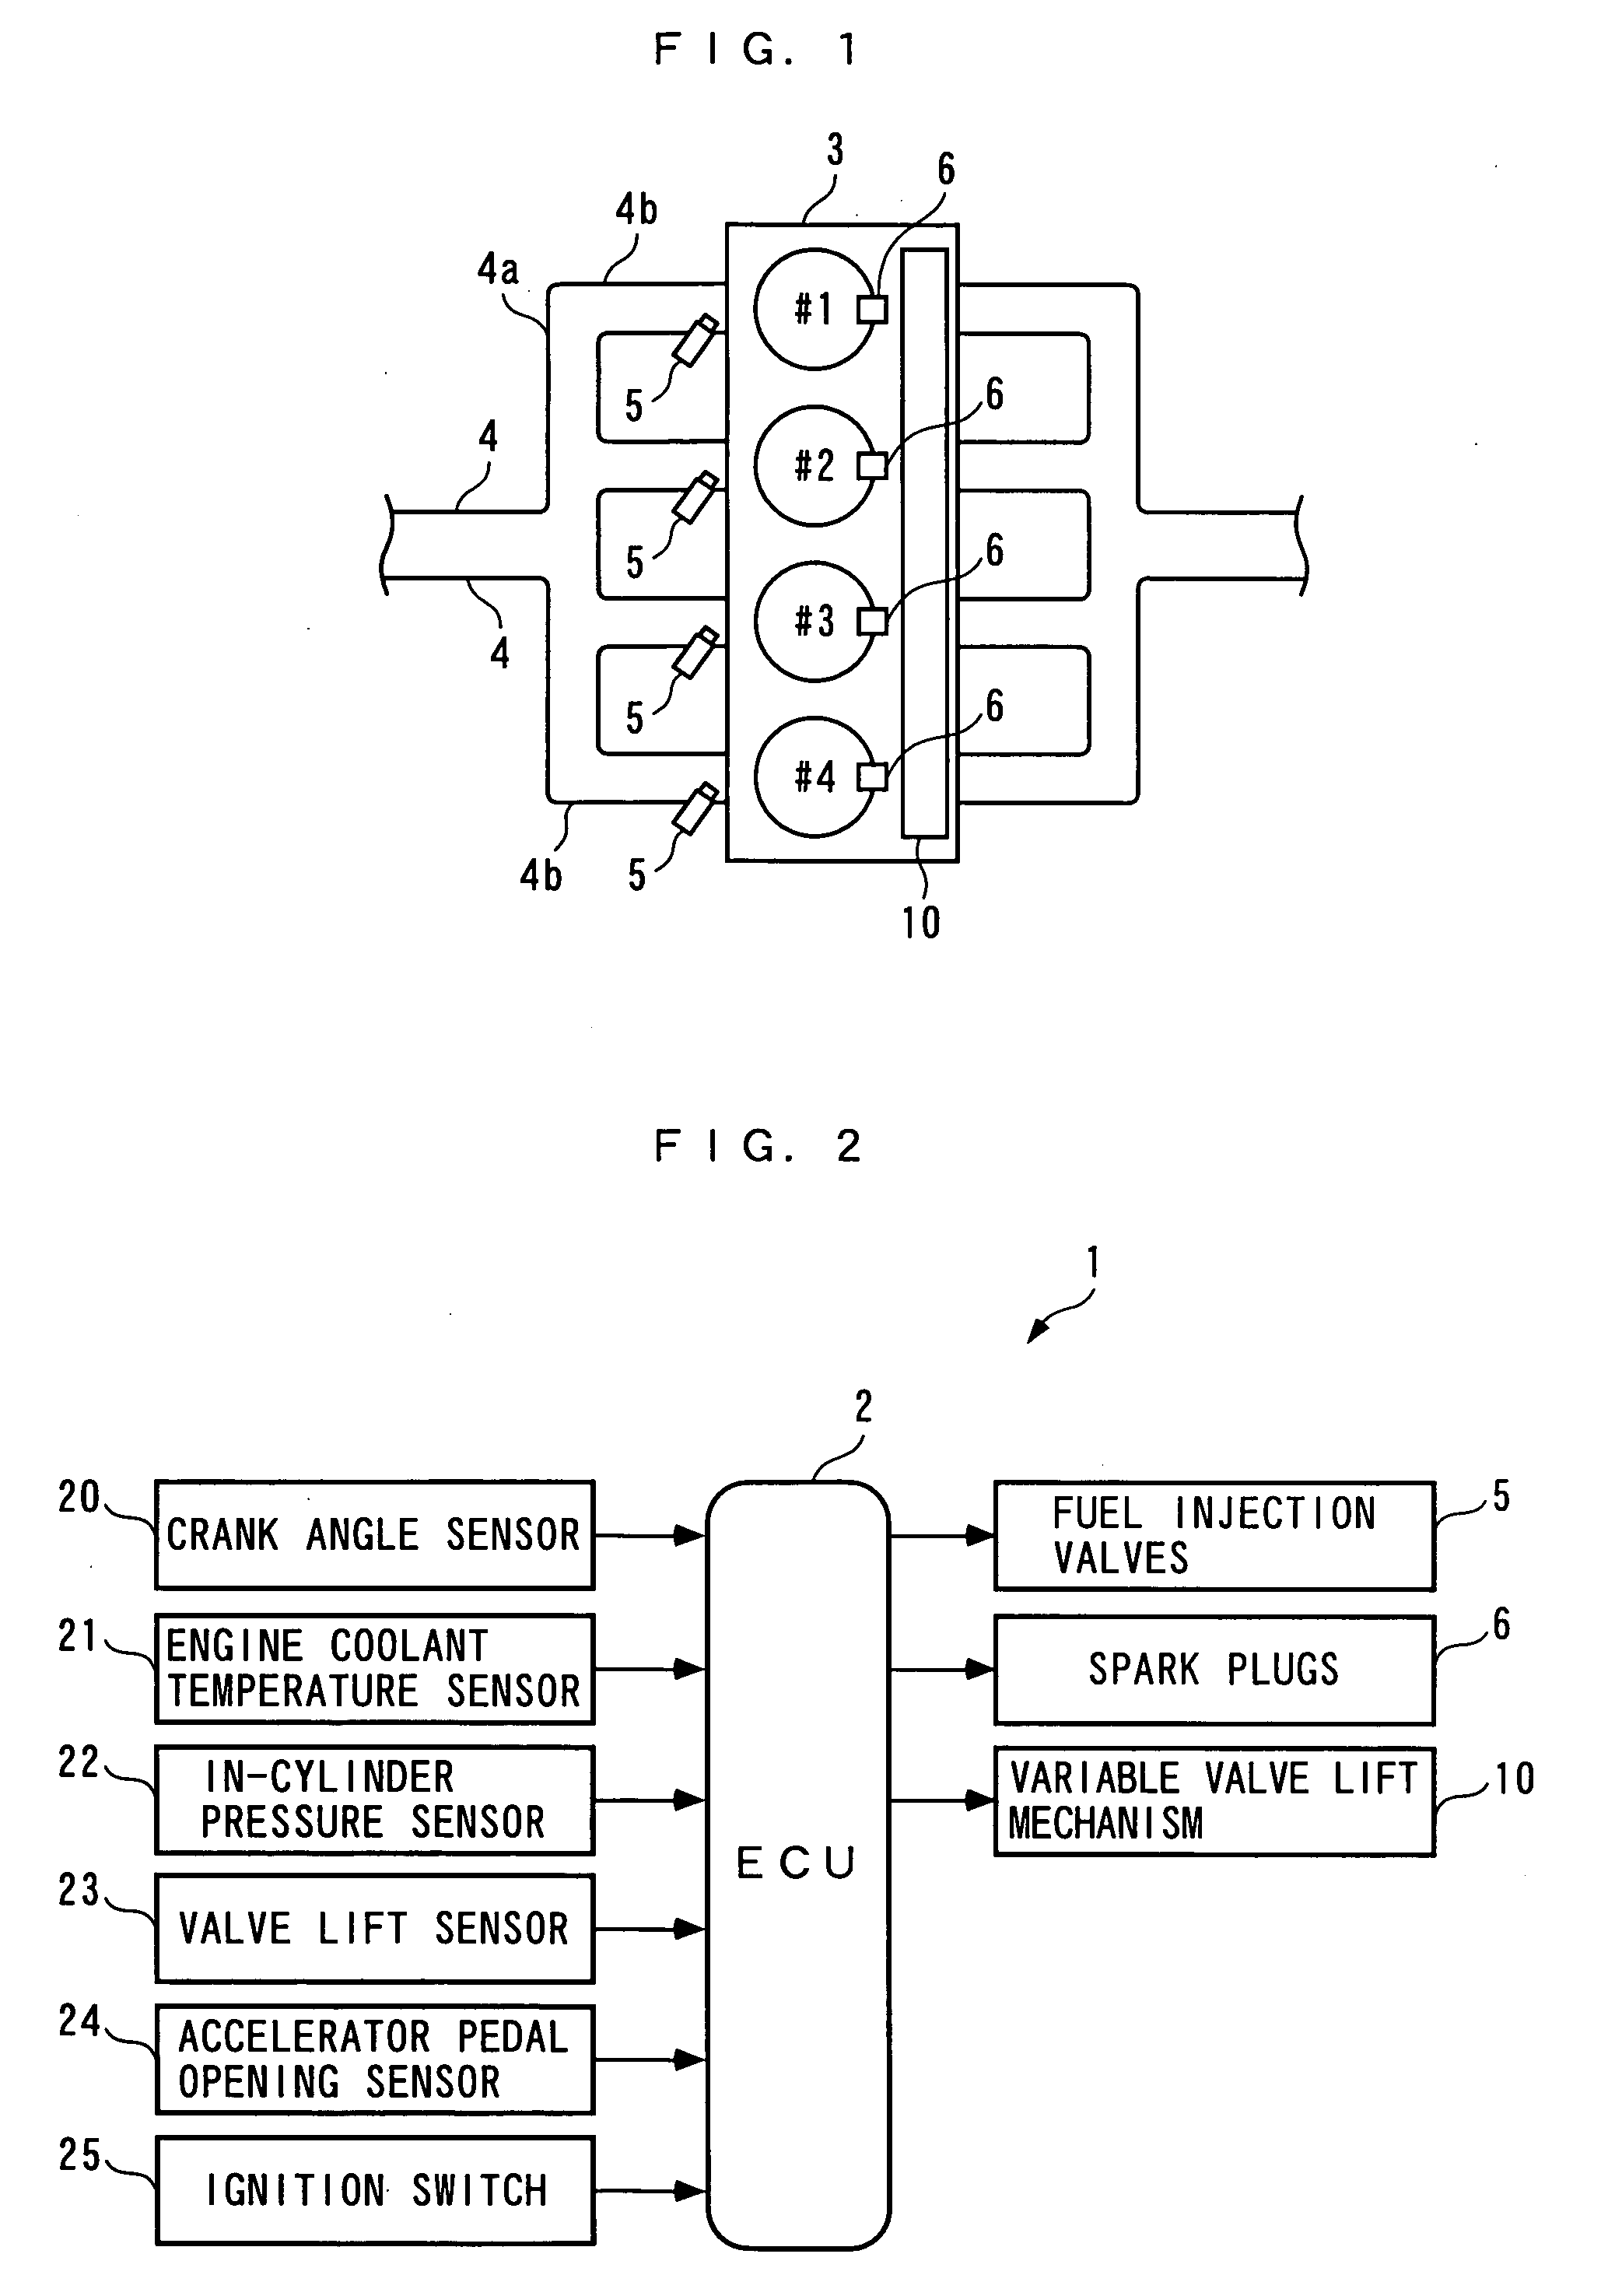 Ignition timing control system for internal combustion engine